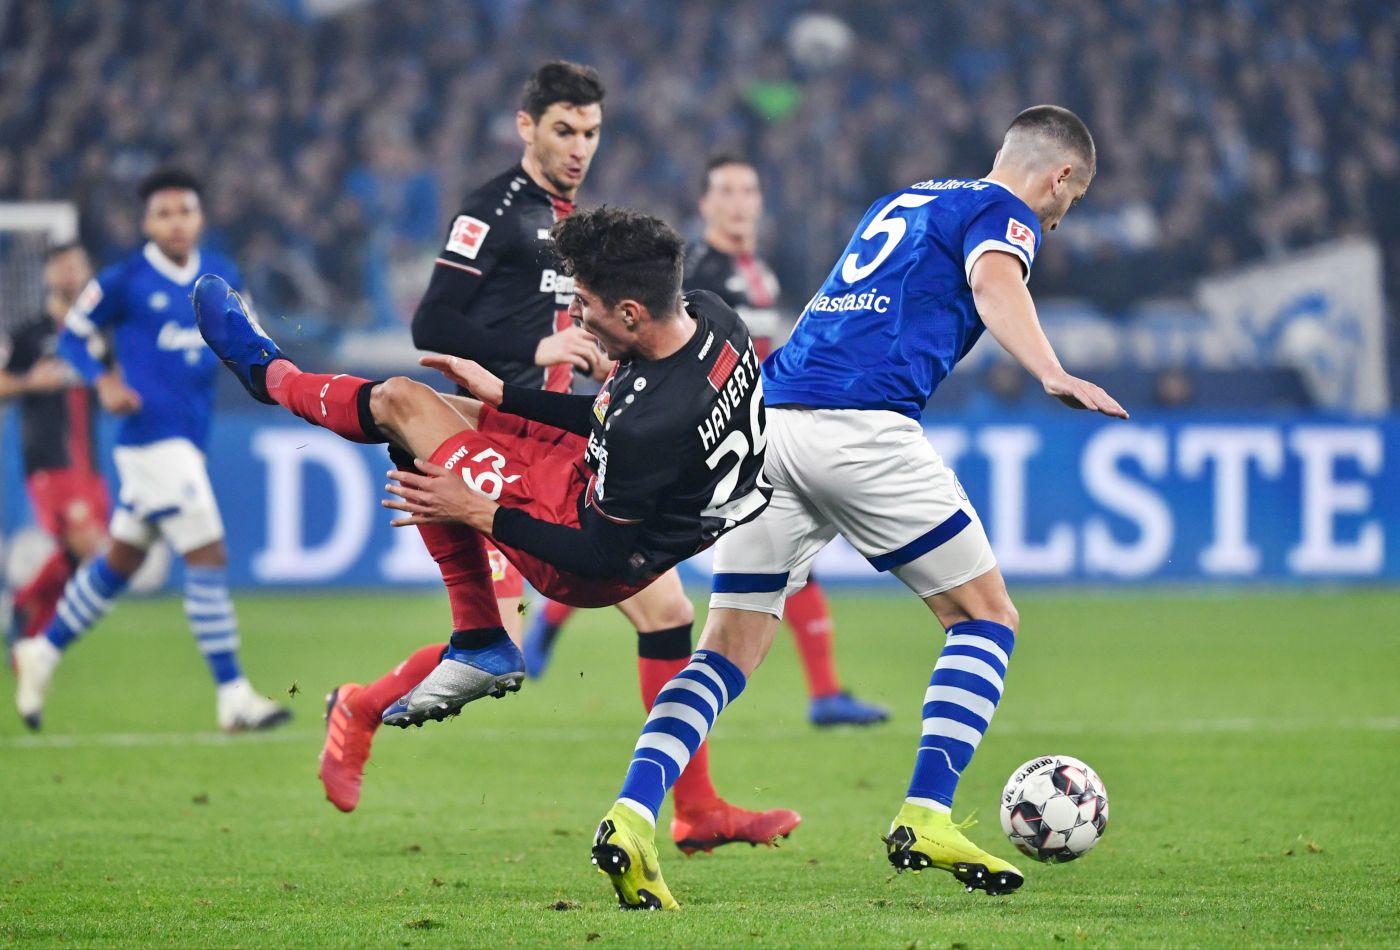 -- Schalke's Serbian defender Matija Nastasic and Leverkusen's German midfielder Kai Havertz (l) vie for the ball during the German first division football match between FC Schalke 04 and Bayer Leverkusen on December 19, 2018.  - Germany OUT / DFL REGULATIONS PROHIBIT ANY USE OF PHOTOGRAPHS AS IMAGE SEQUENCES AND/OR QUASI-VIDEO
 / AFP / dpa / Ina Fassbender / DFL REGULATIONS PROHIBIT ANY USE OF PHOTOGRAPHS AS IMAGE SEQUENCES AND/OR QUASI-VIDEO